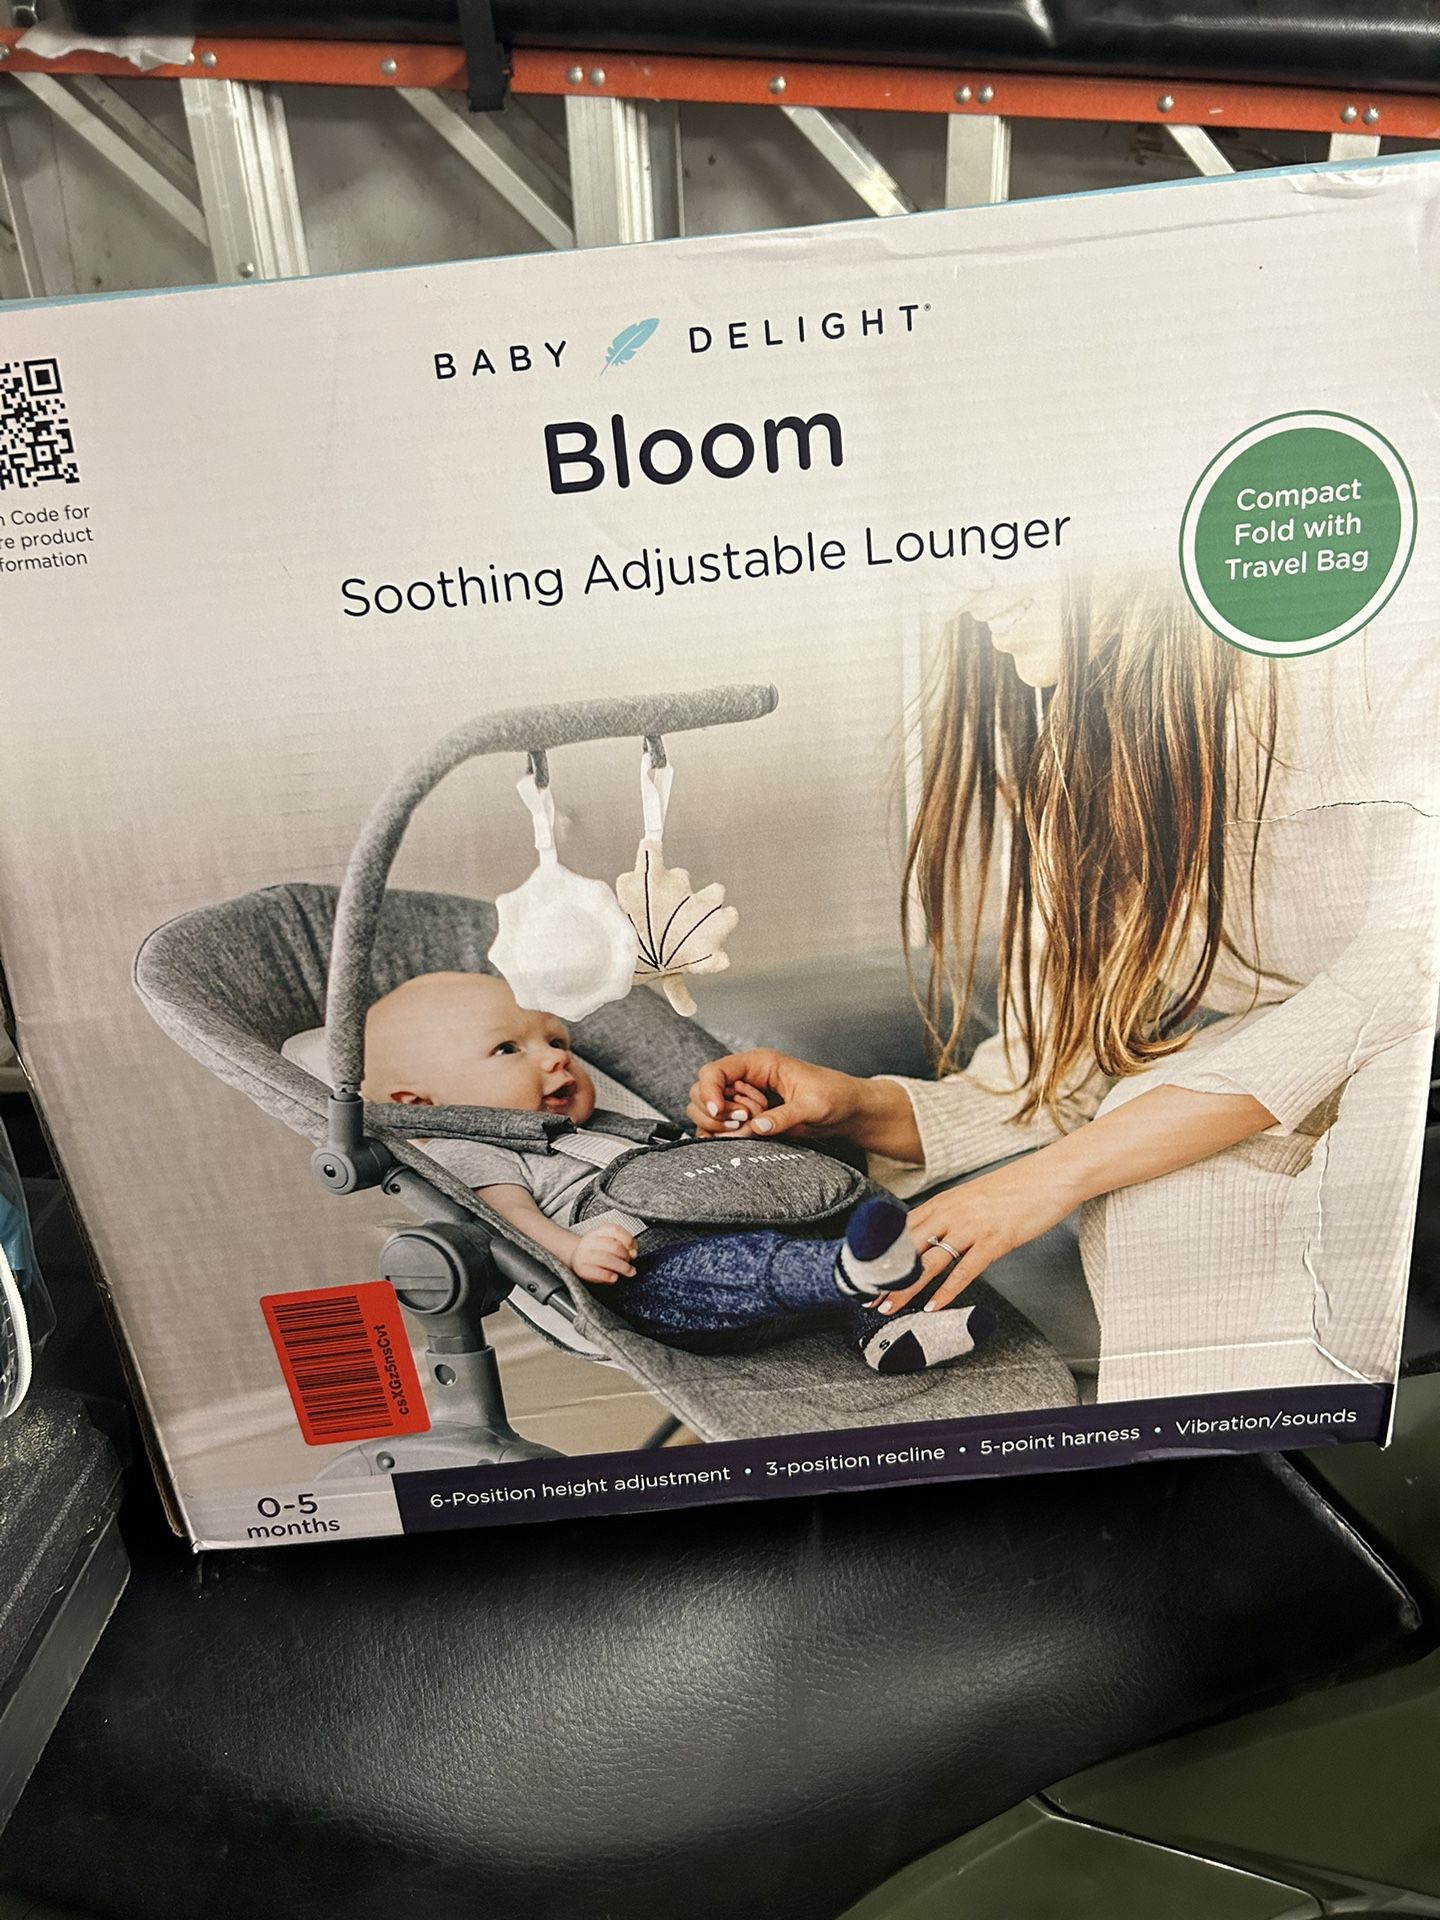 Bloom Soothing Adjustable Lounger